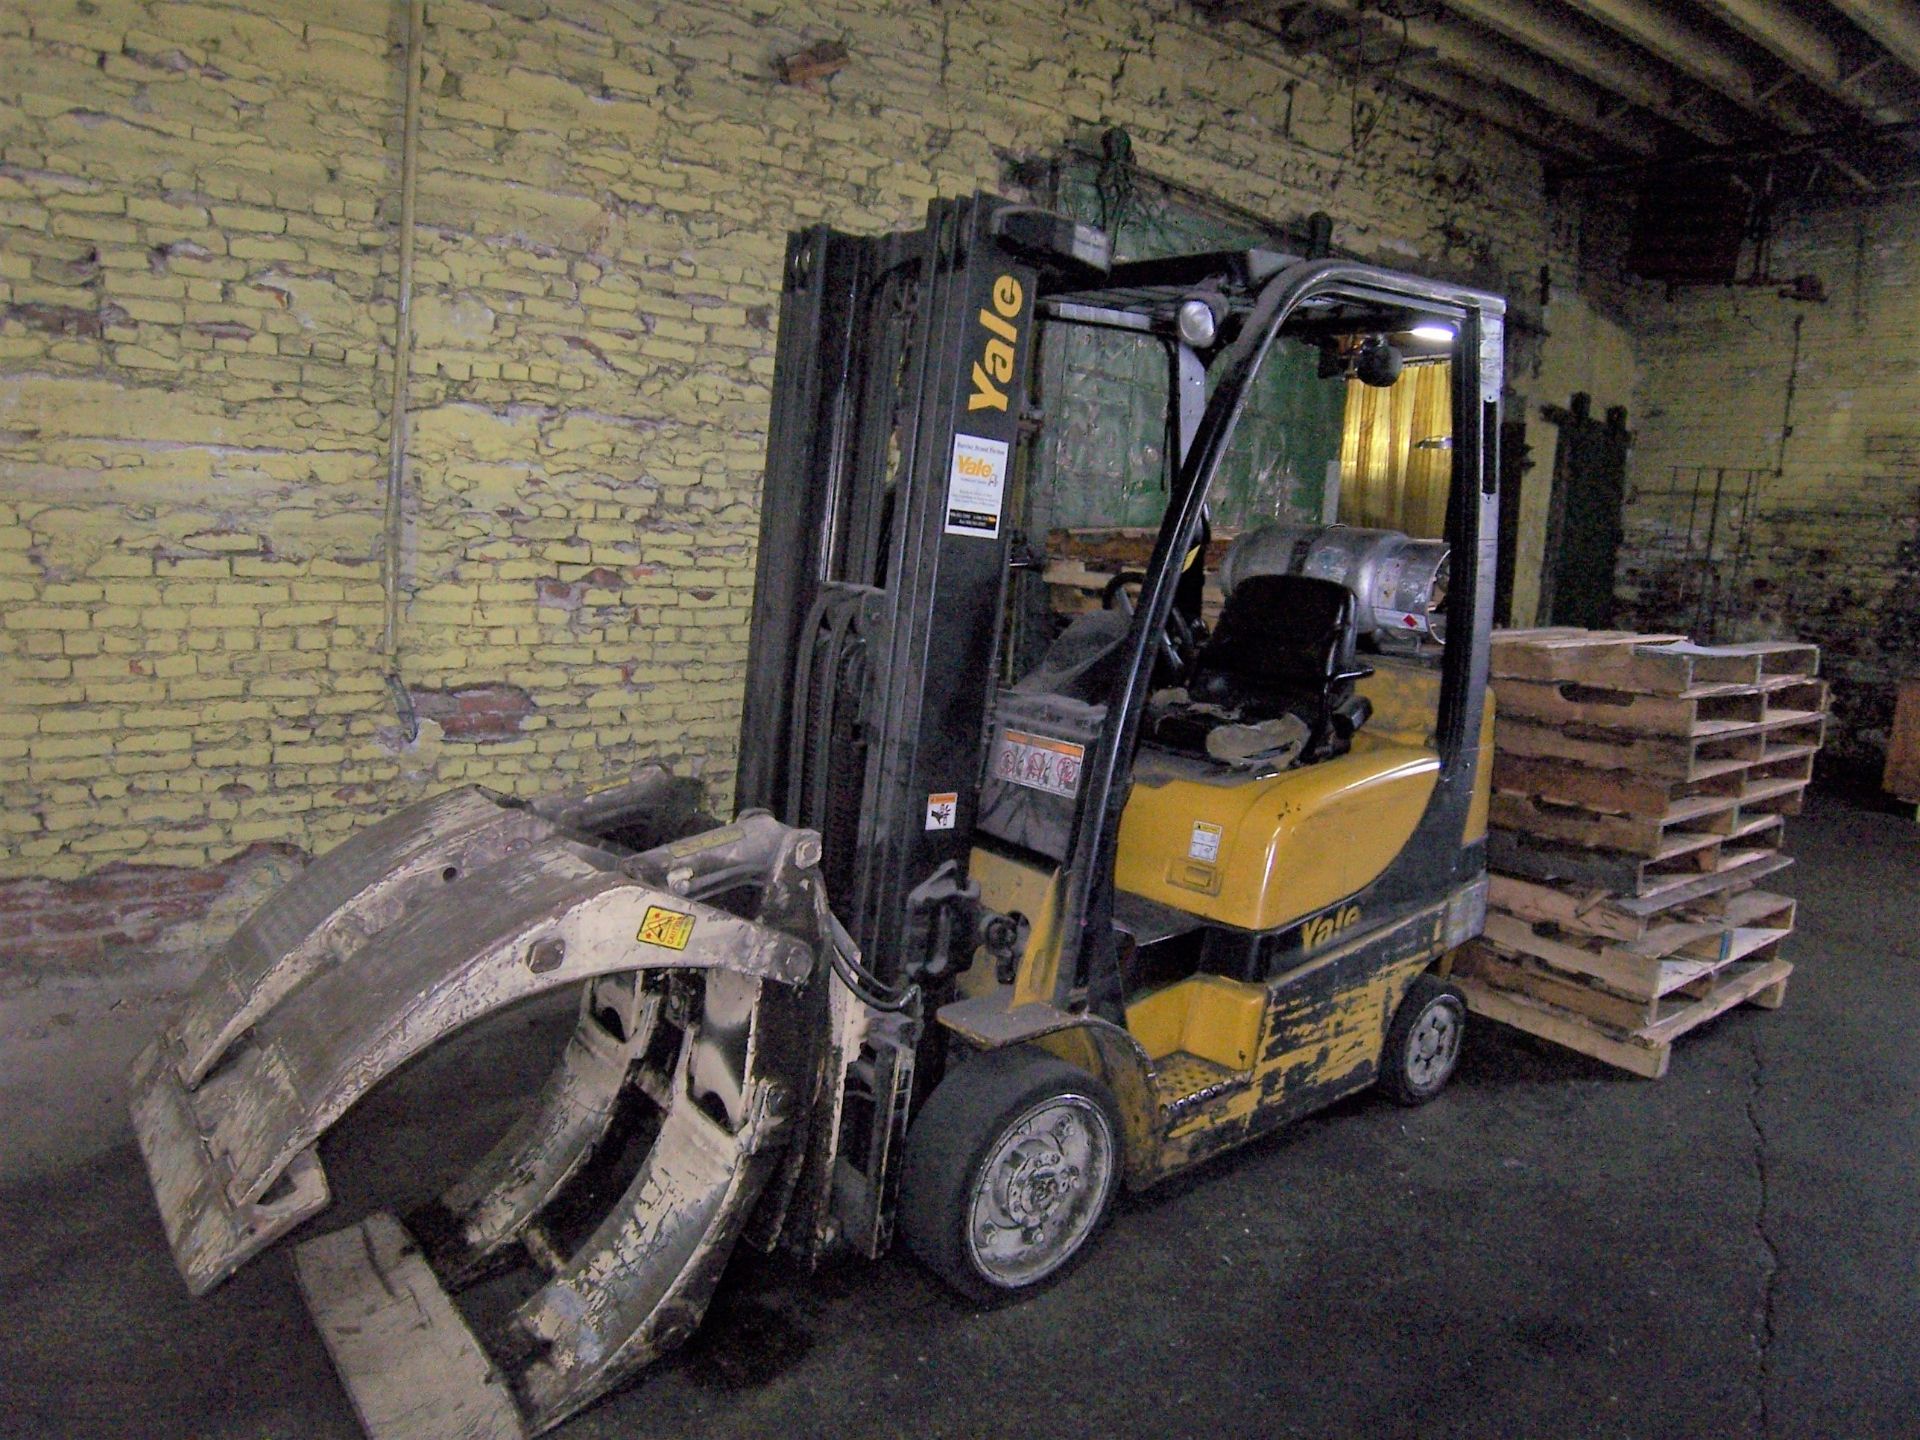 4350# CAPACITY YALE VELOCITOR 50VX PROPANE POWERED FORKLIFT,TECHTRONIX 100 TRANSMISSION, HARD TIRES,